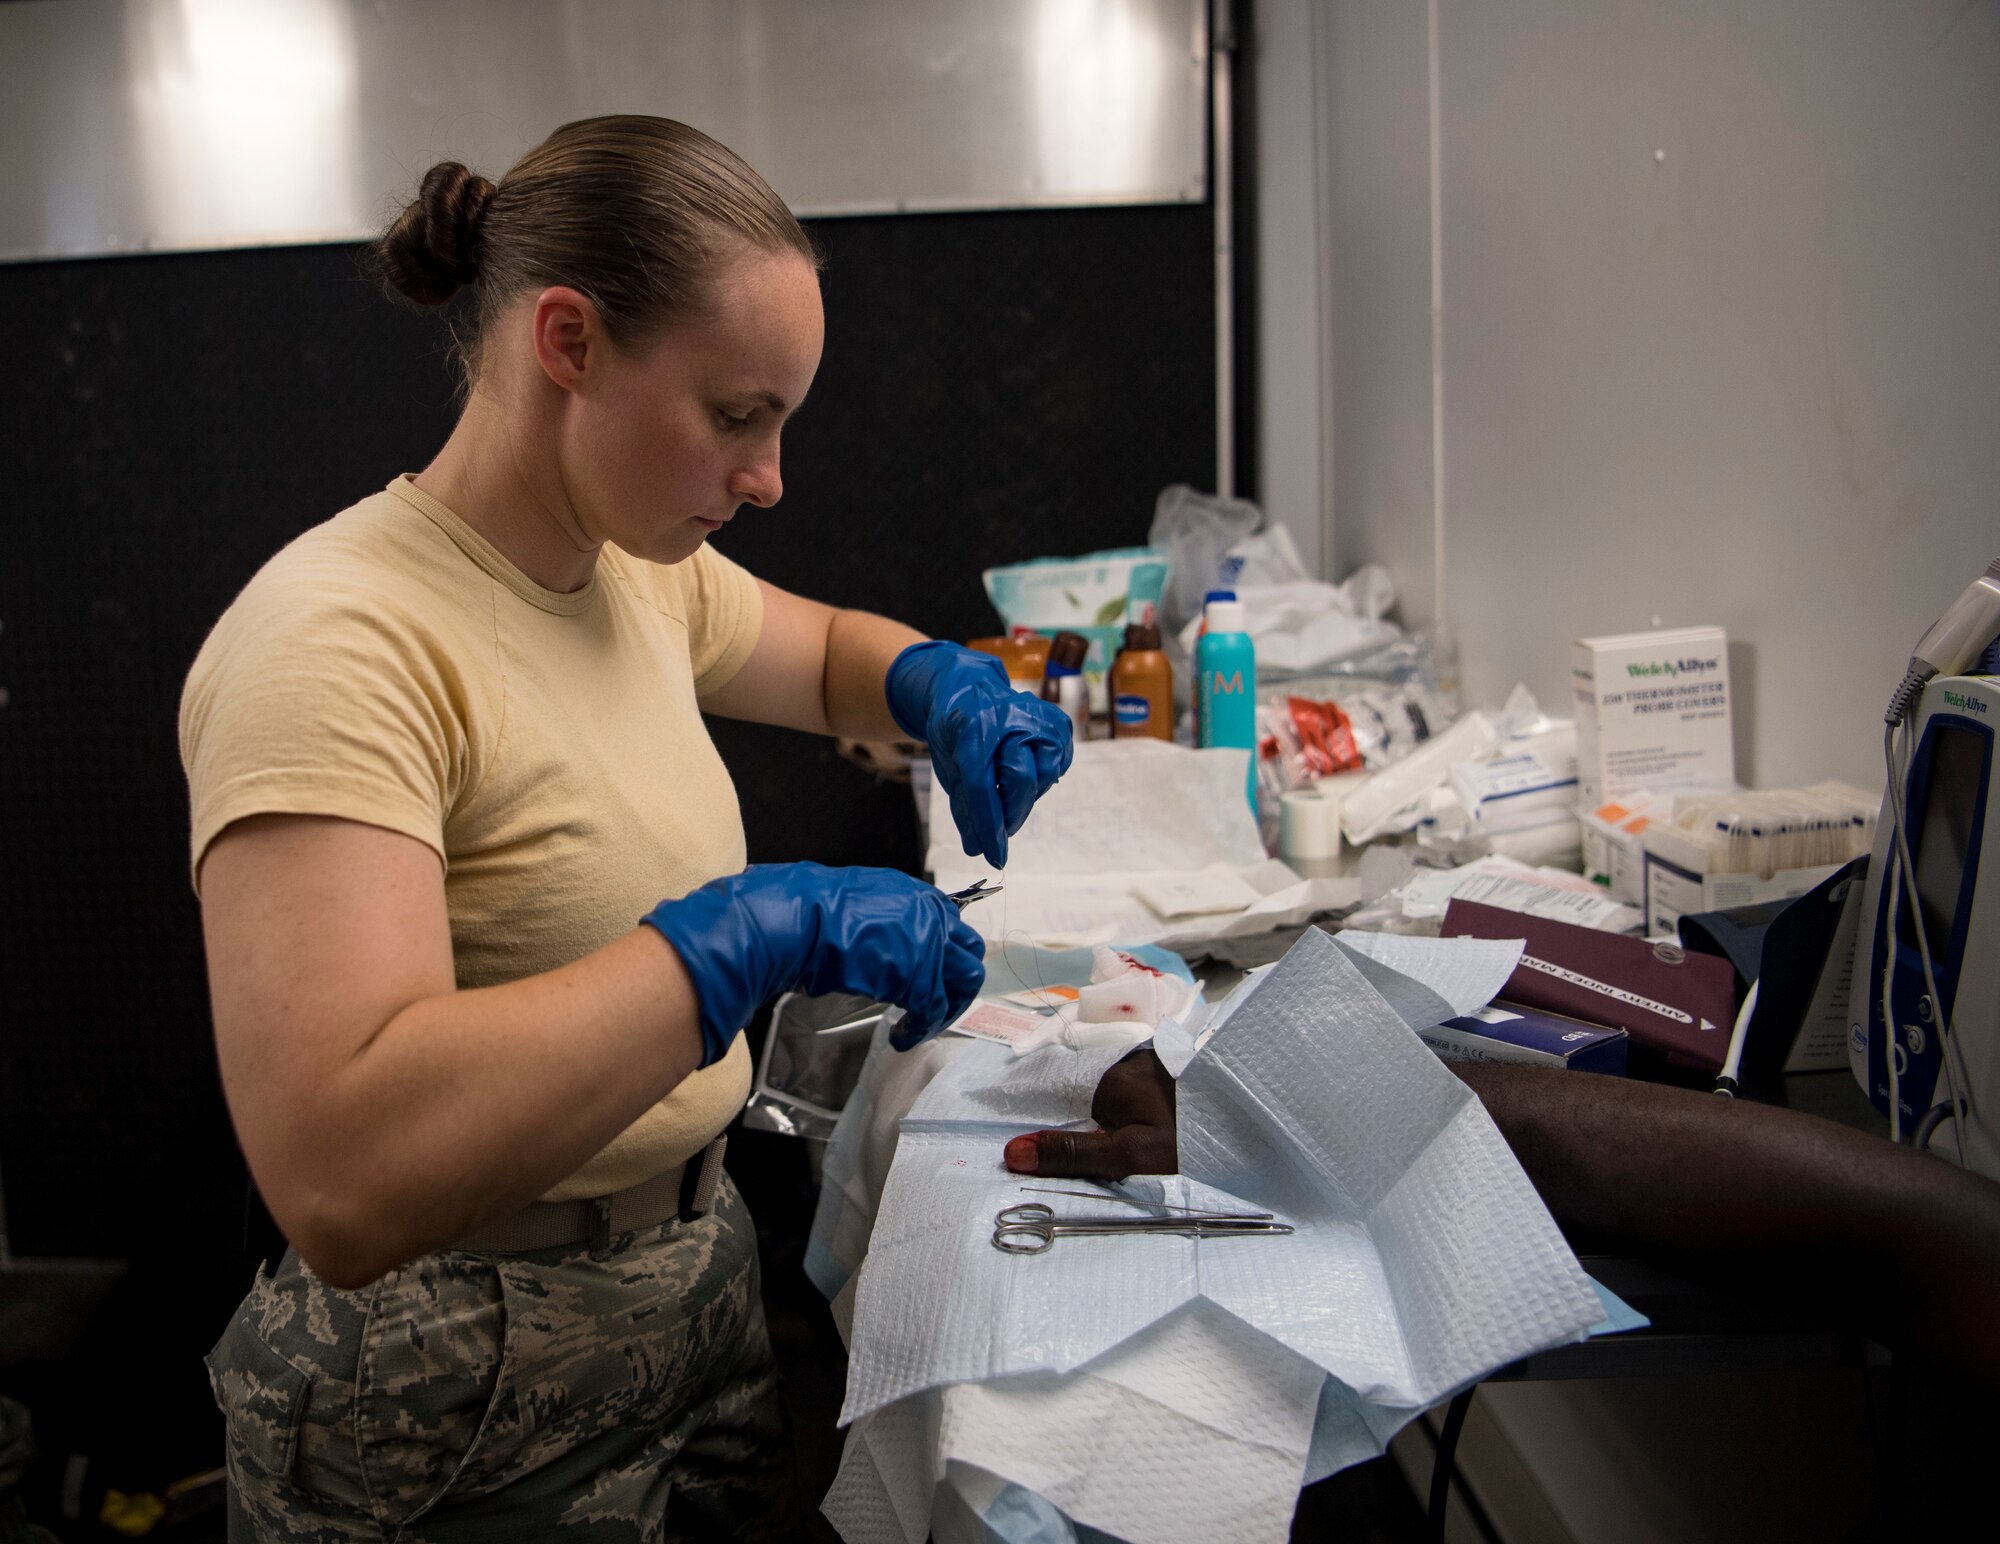 U.S. Air Force Staff Sgt. Jessica Ewens, a 96th Aeromedical Squadron independent duty medical technician out of Eglin Air Force Base, Florida, provides medical care to a patient inside a mobile medical clinic at Tyndall Air Force Base, Florida, Oct. 17, 2018. Support personnel from Tyndall and other bases were on location to support Airmen returning to their homes to assess damage and collect personal belongings. (U.S. Air Force photo by A1C Kelly Walker)